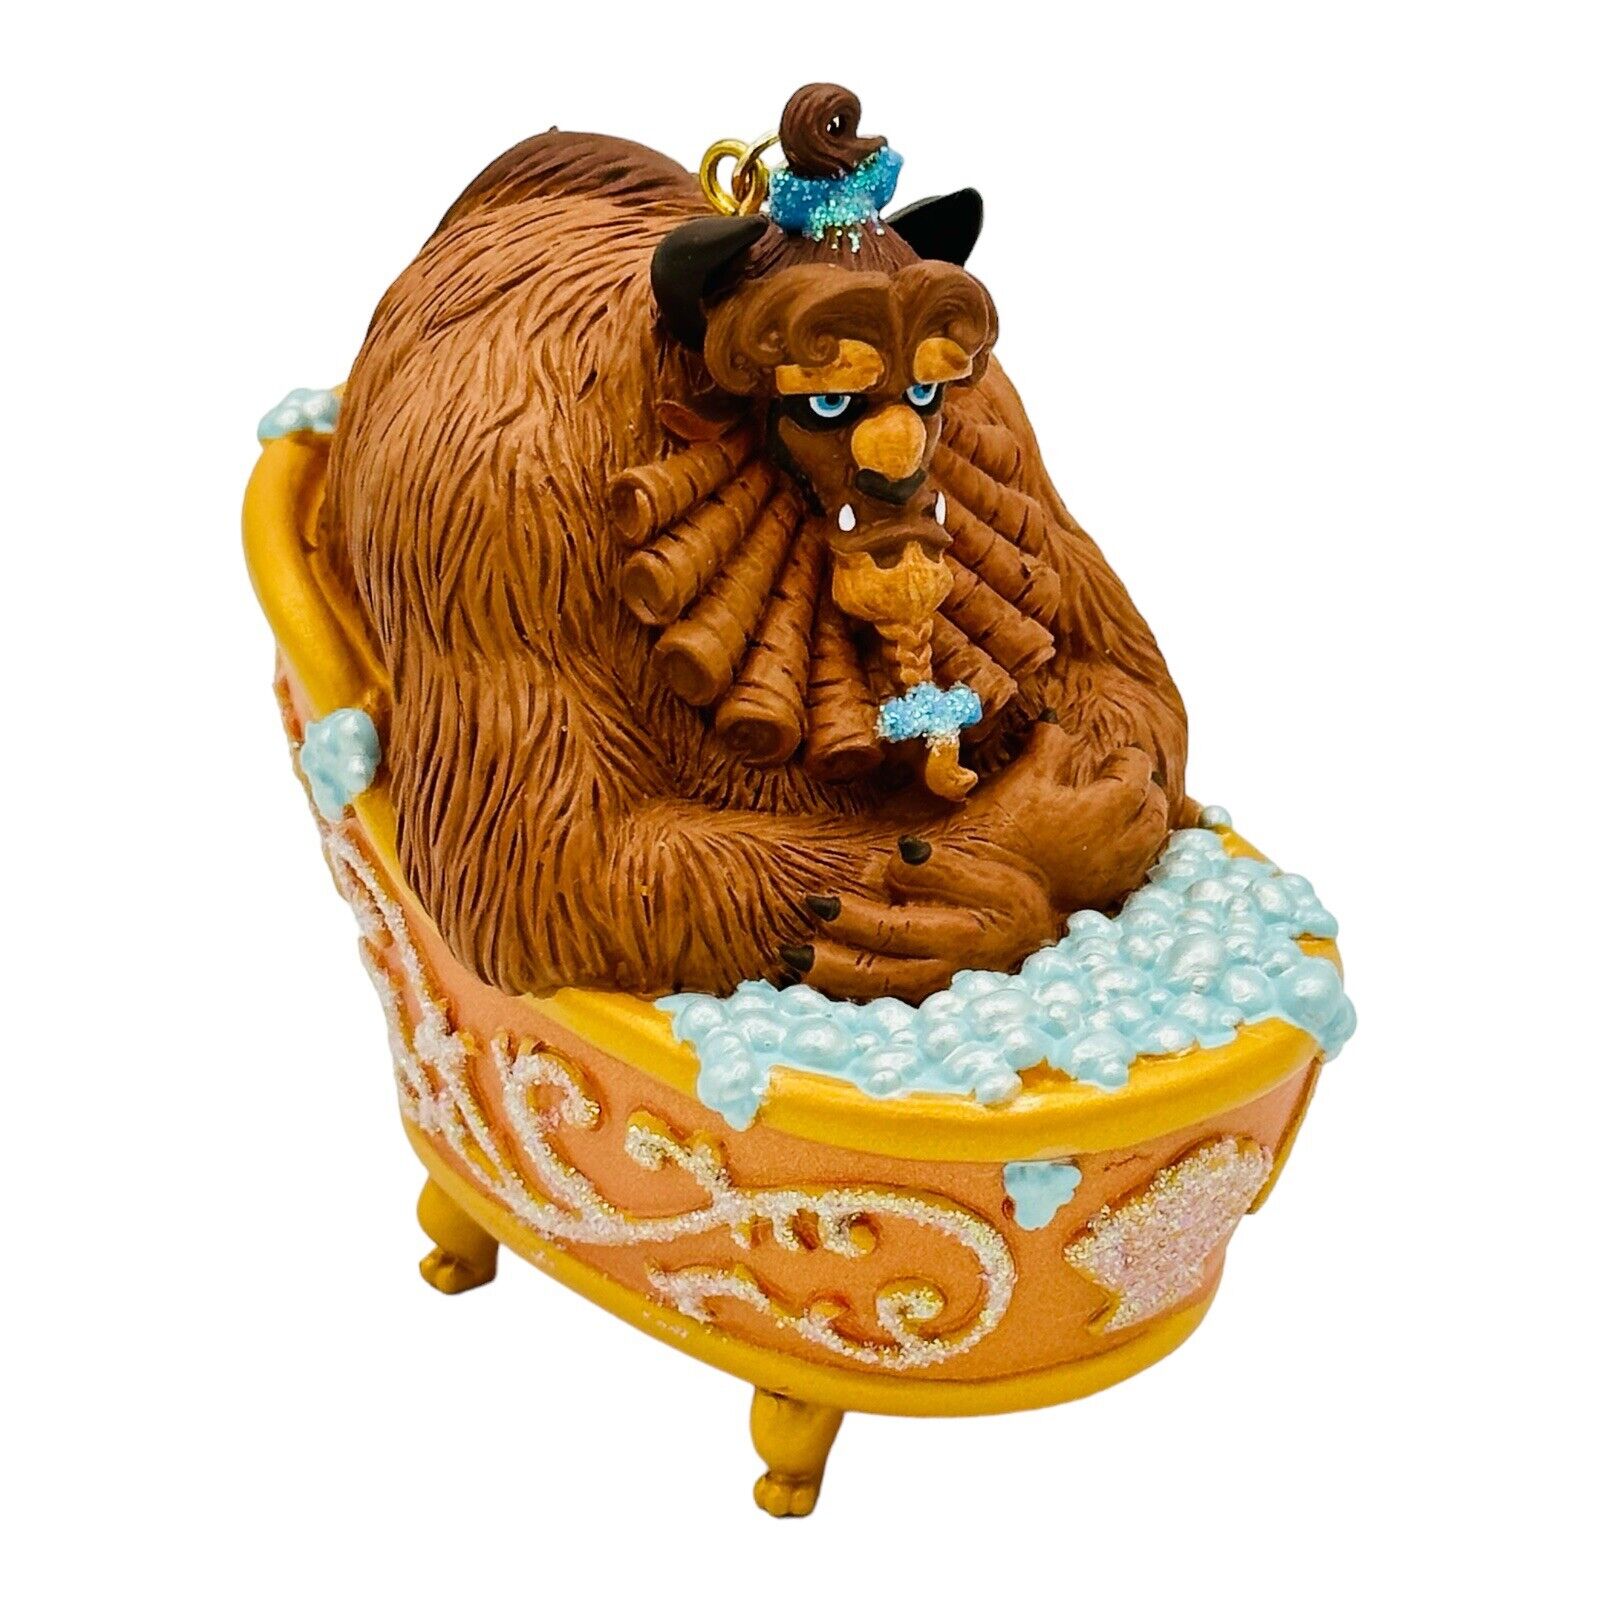 Disney Sketchbook Ornament Bath Time for The Beast 2015 Beauty and the Beast Tub